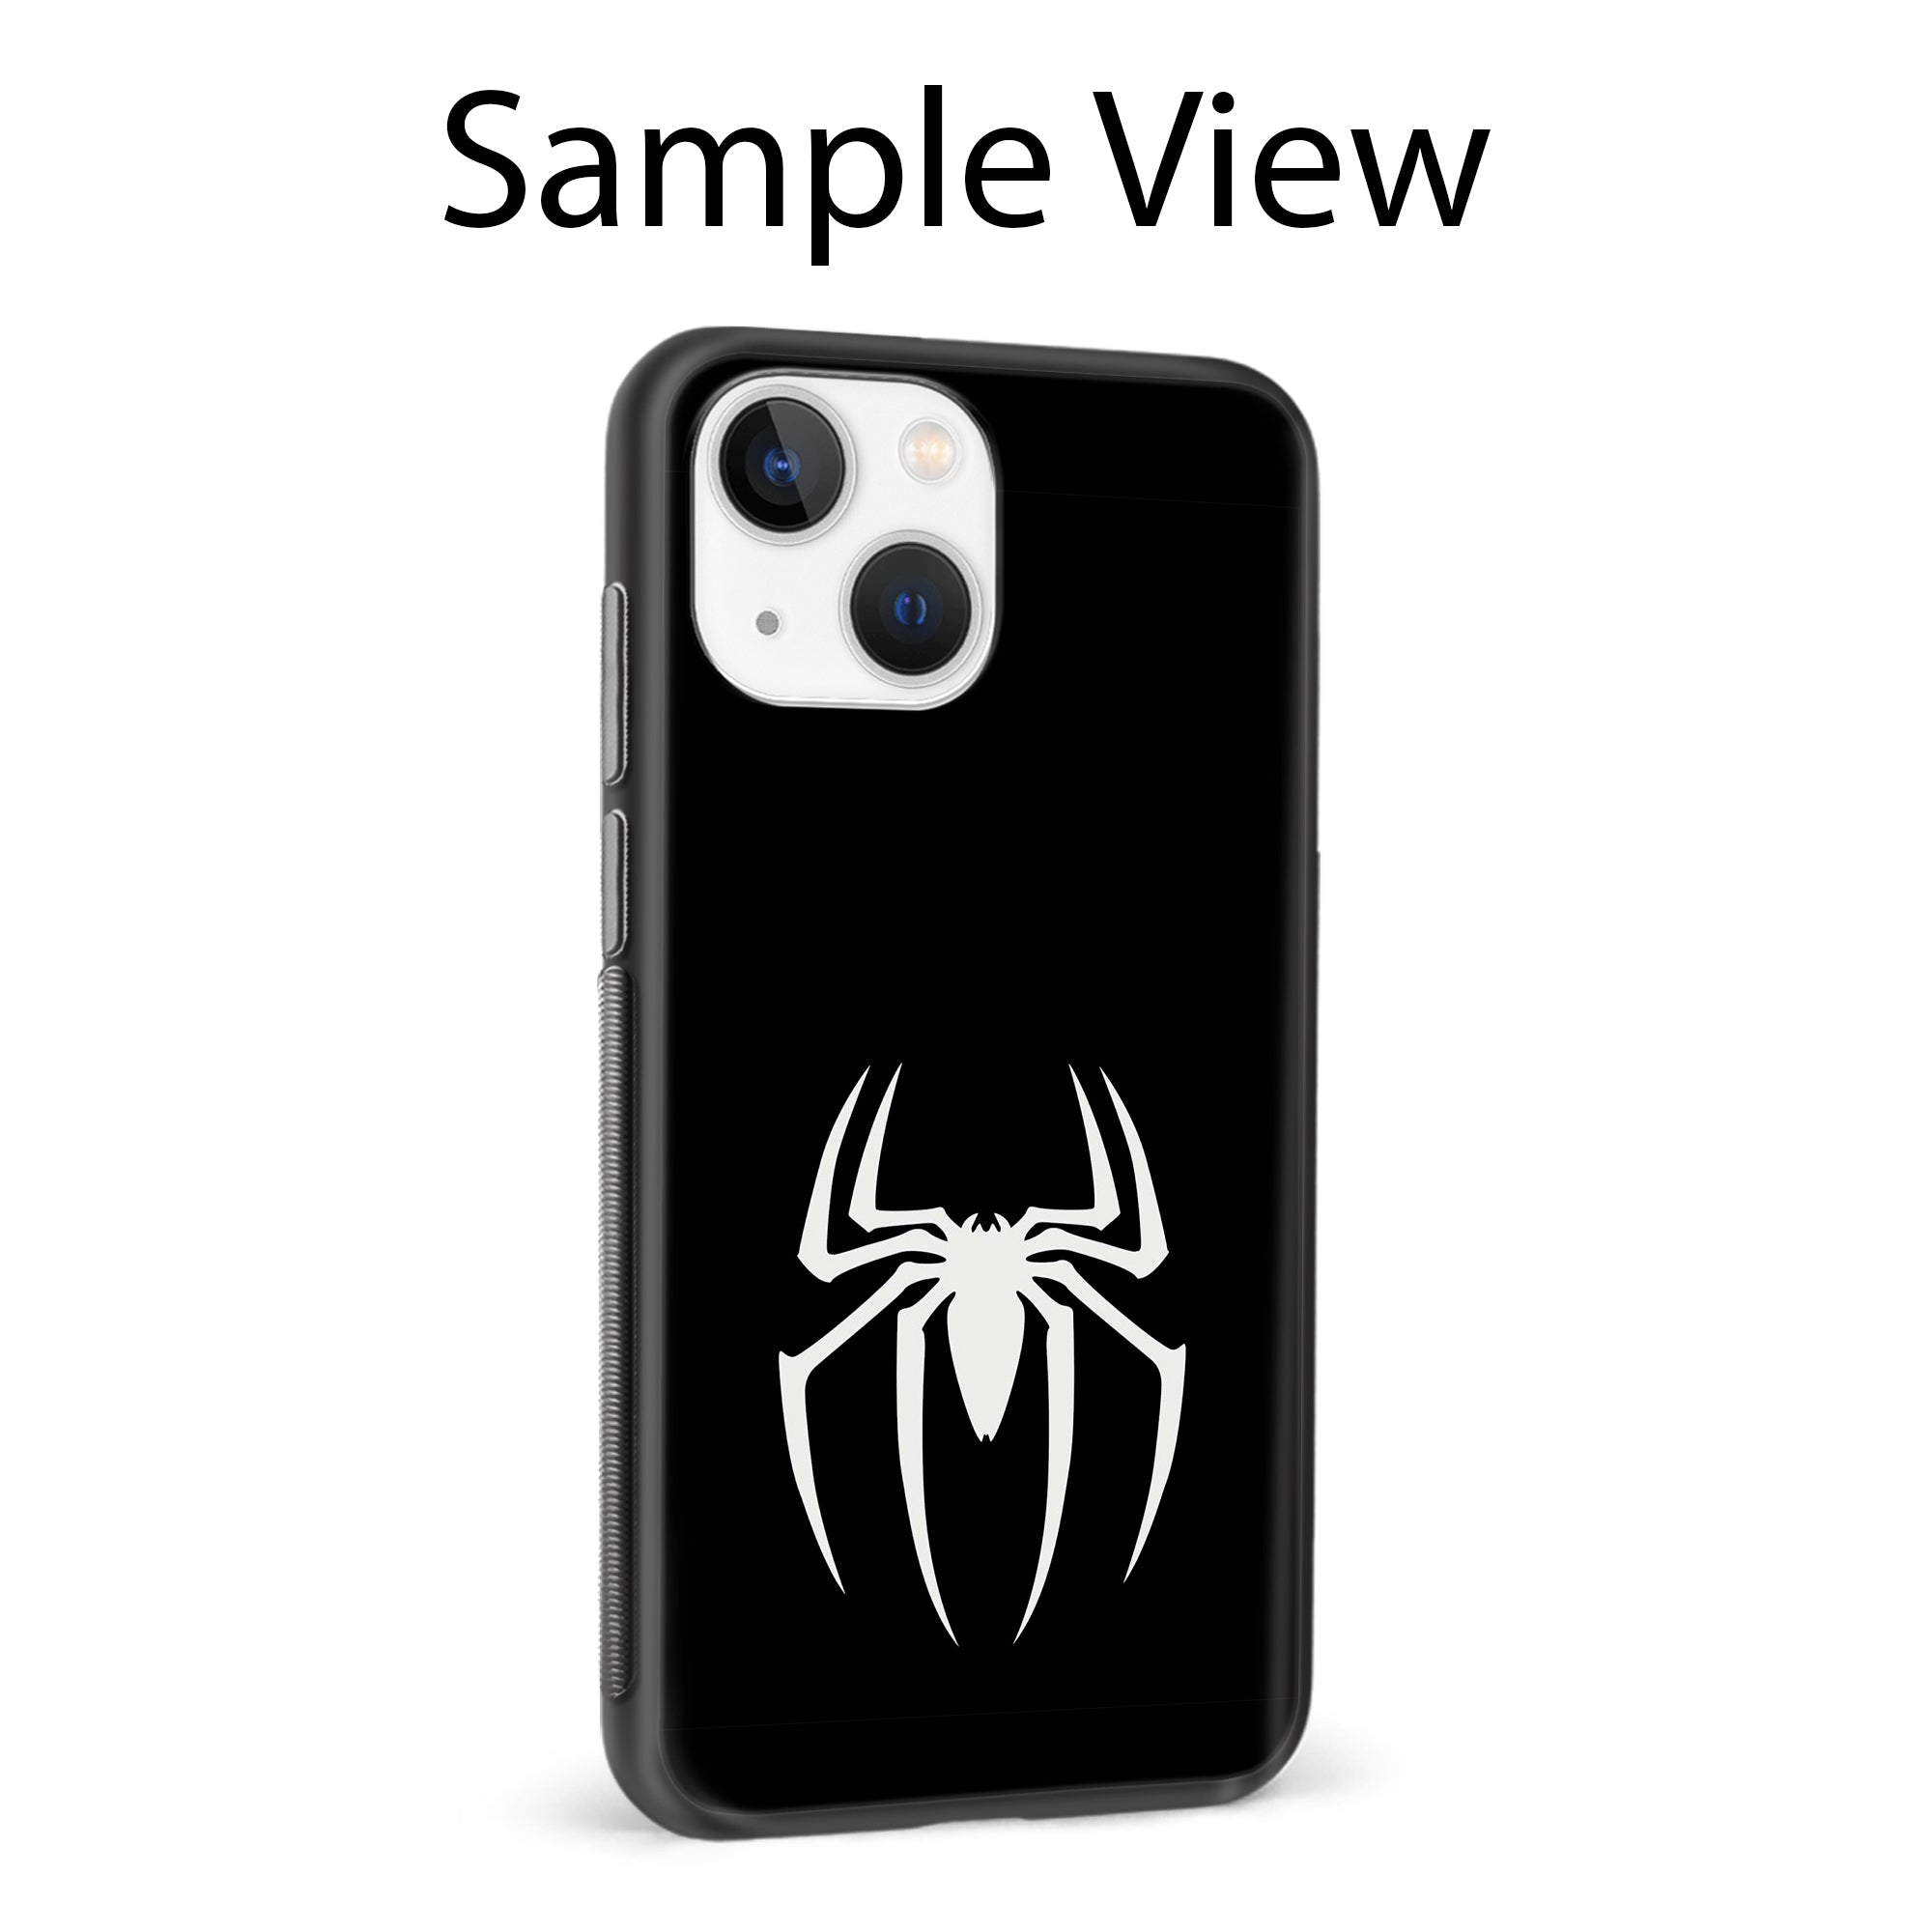 Buy Black Spiderman Logo Metal-Silicon Back Mobile Phone Case/Cover For Samsung Galaxy A50 / A50s / A30s Online